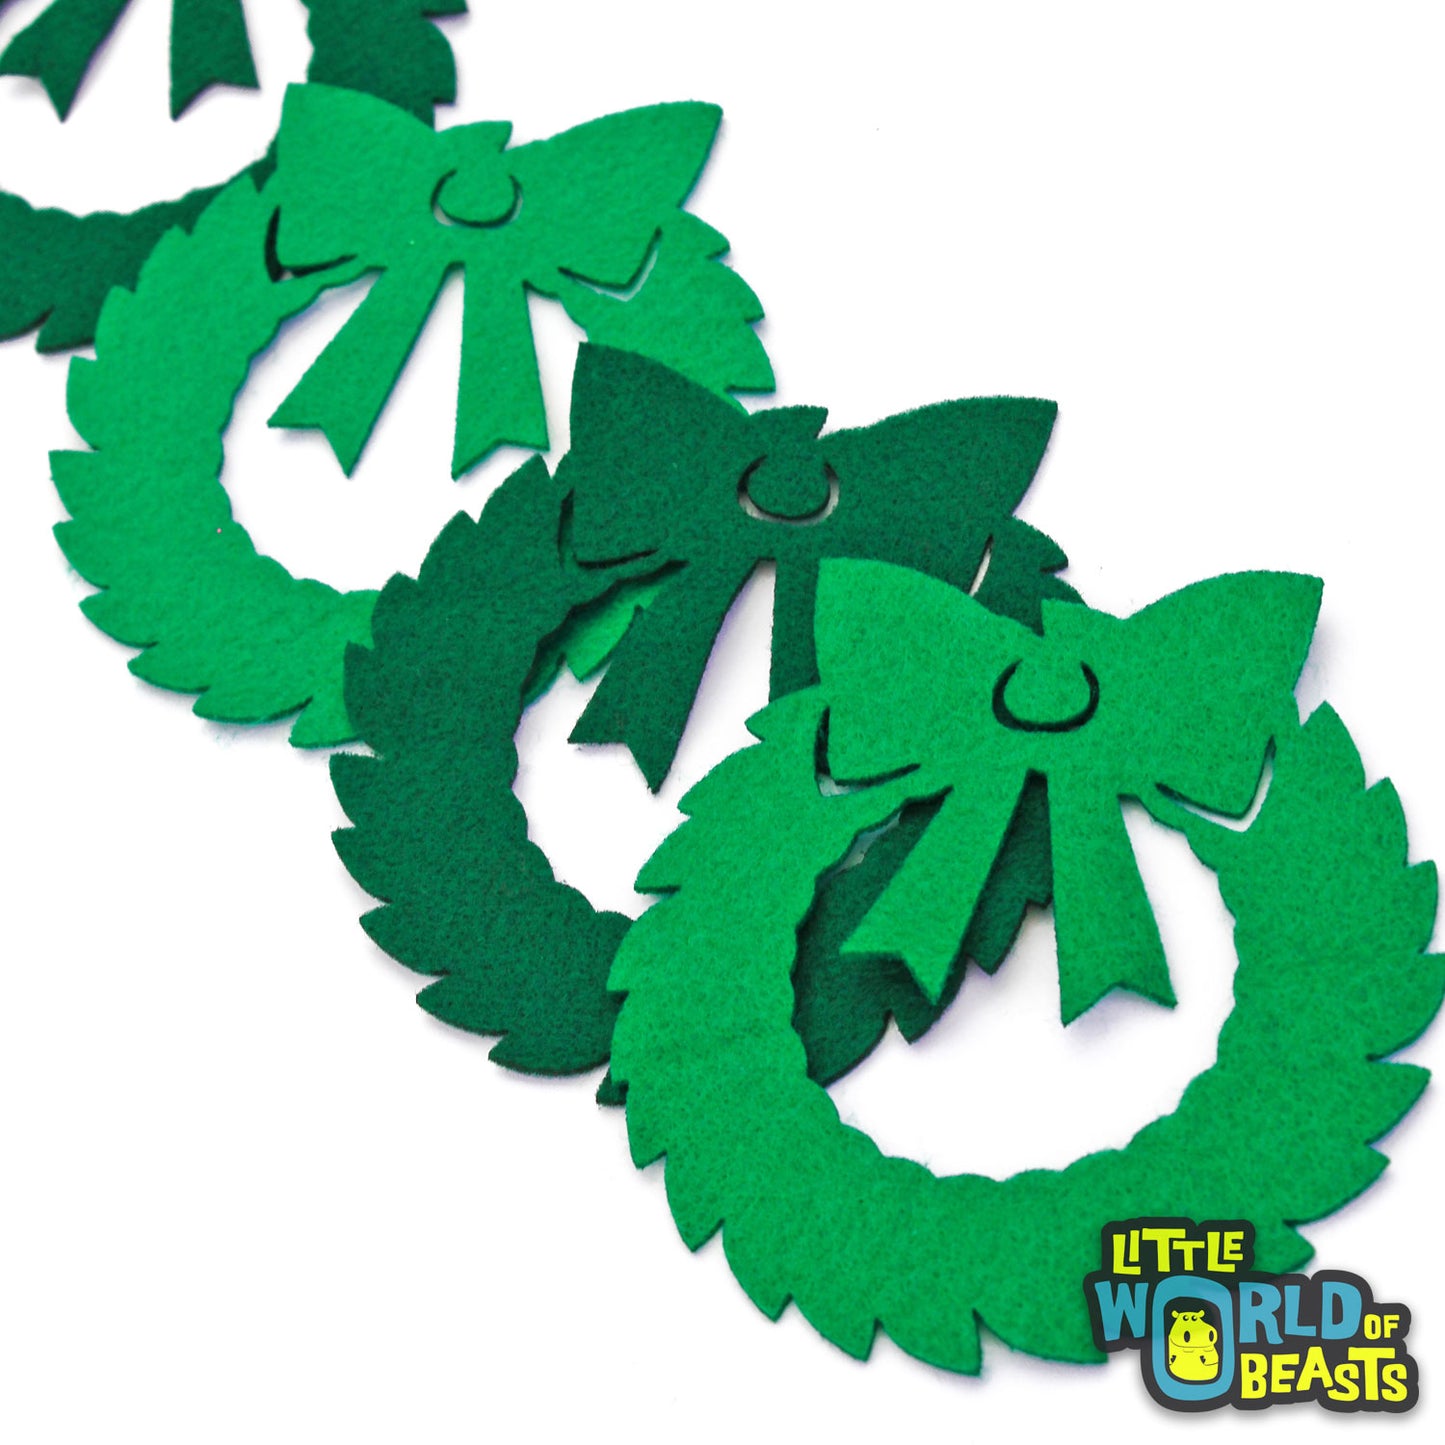 Wreath - Felt Shapes - Pre-cut for Crafts and Garlands